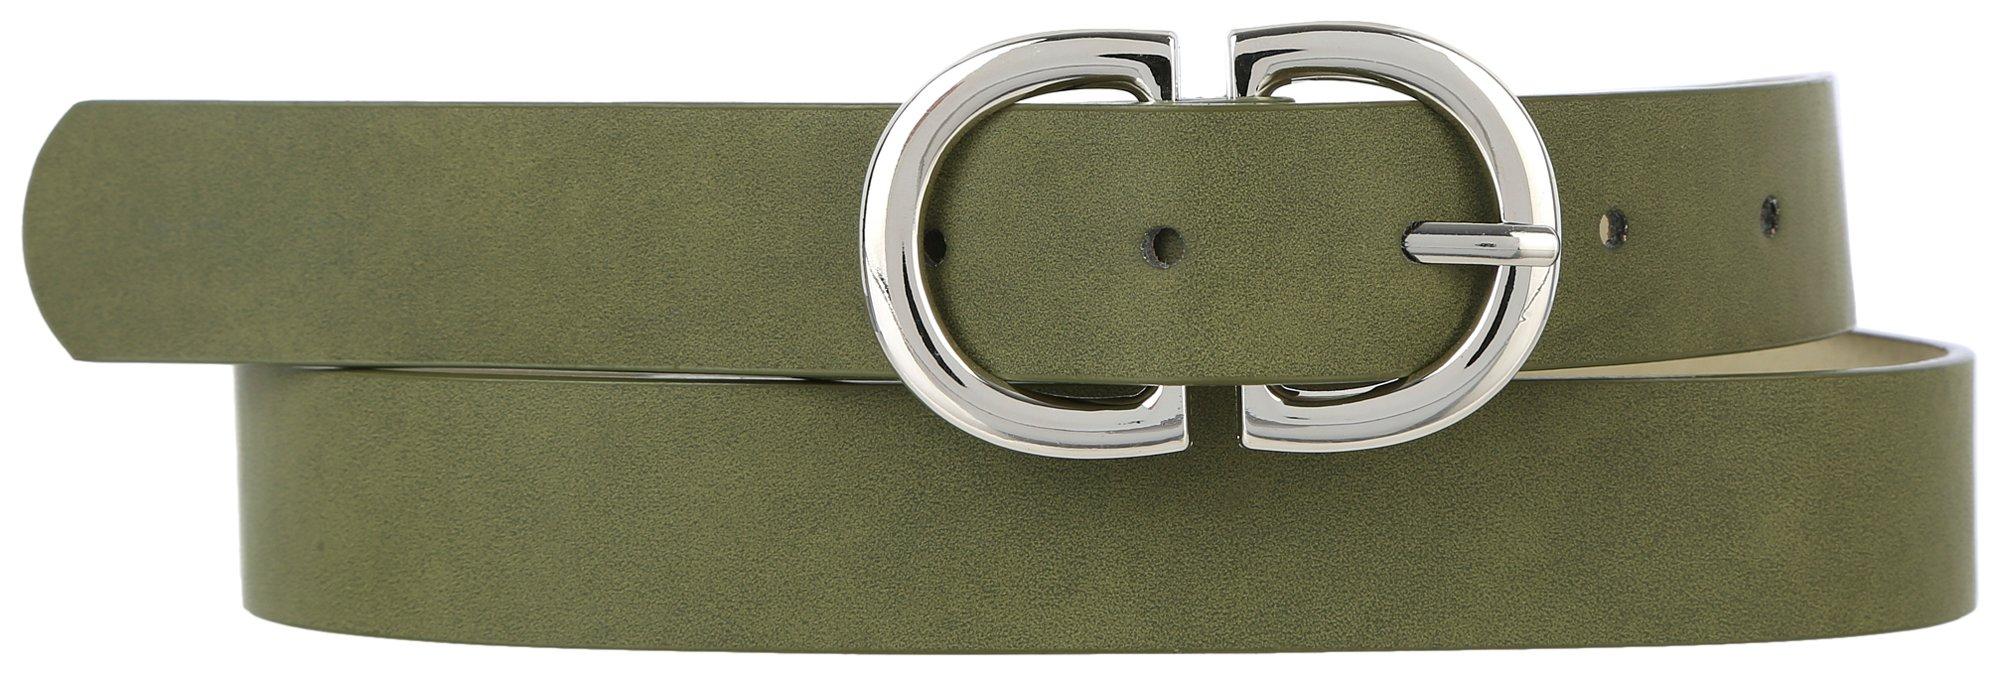 Womens 1 In. Solid Vegan Leather Belt